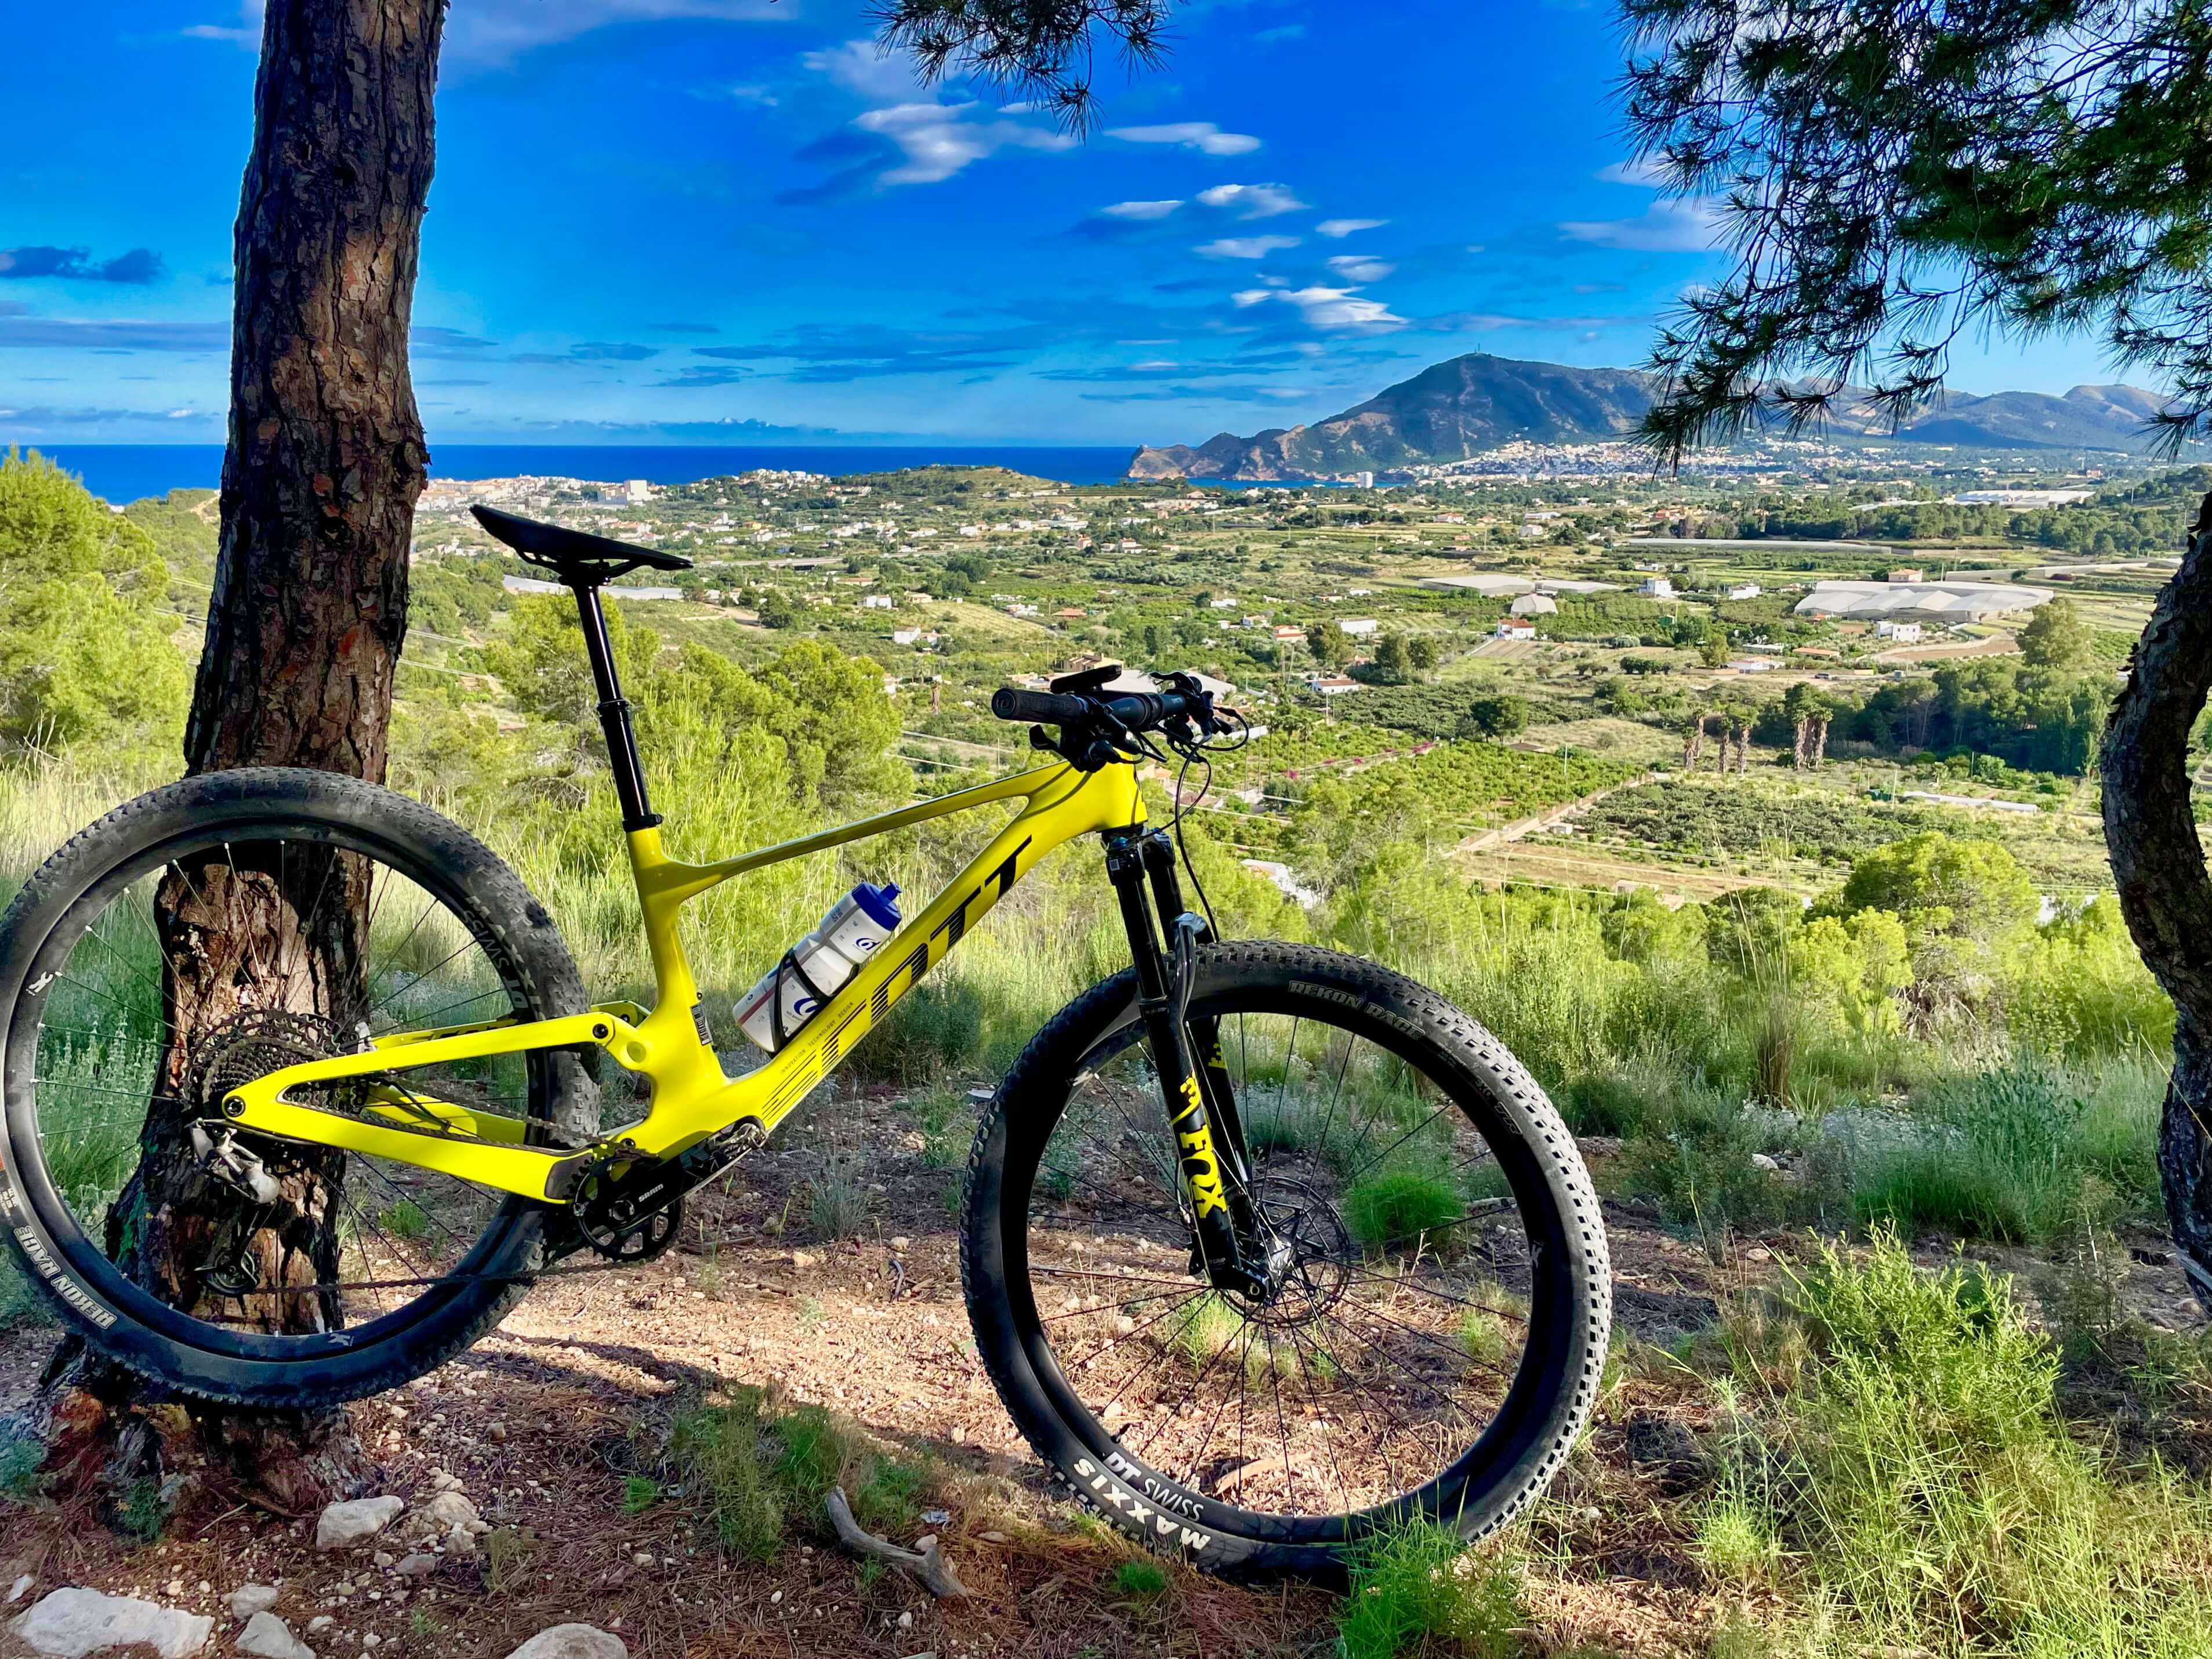 Rental Scott Bike with hills of Altea and Cape in the background